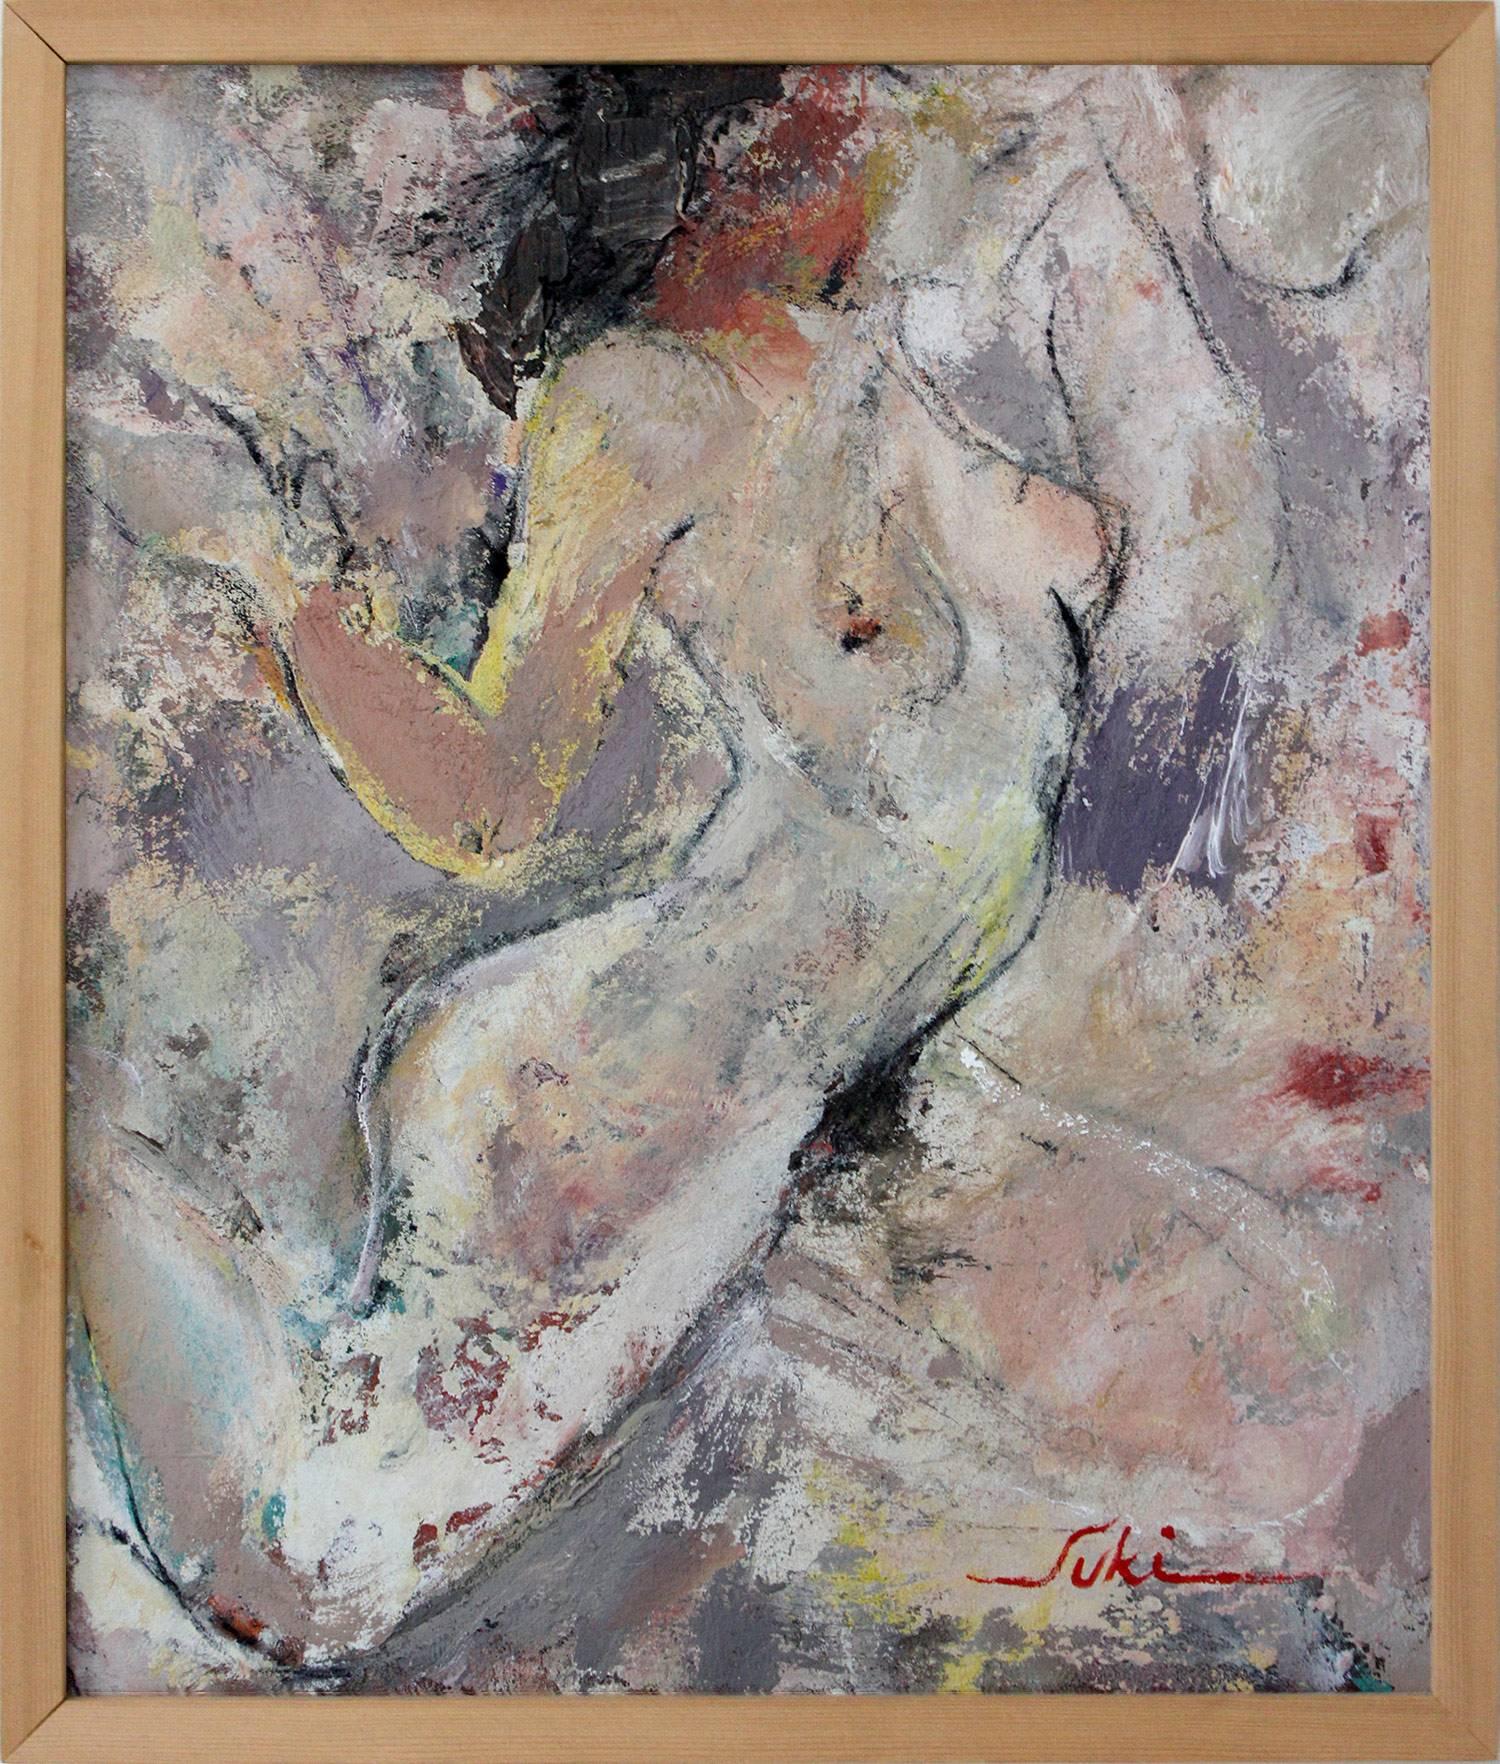 "Work 1 (Nude)" Abstract Nude Figure Expressionist Acrylic on Canvas Painting